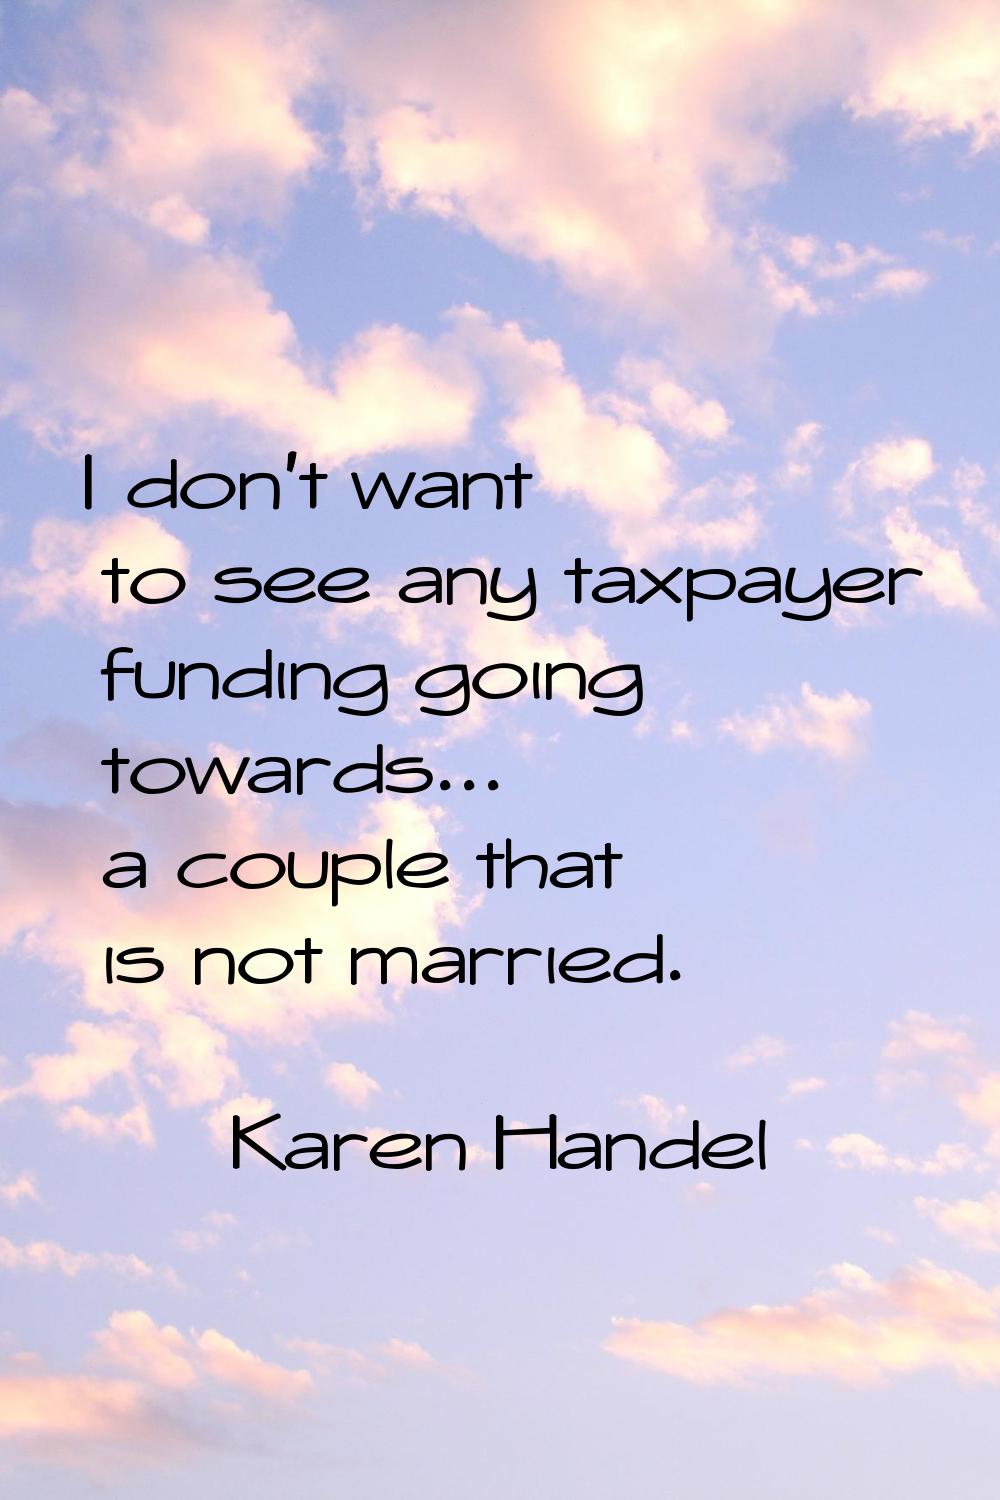 I don't want to see any taxpayer funding going towards... a couple that is not married.